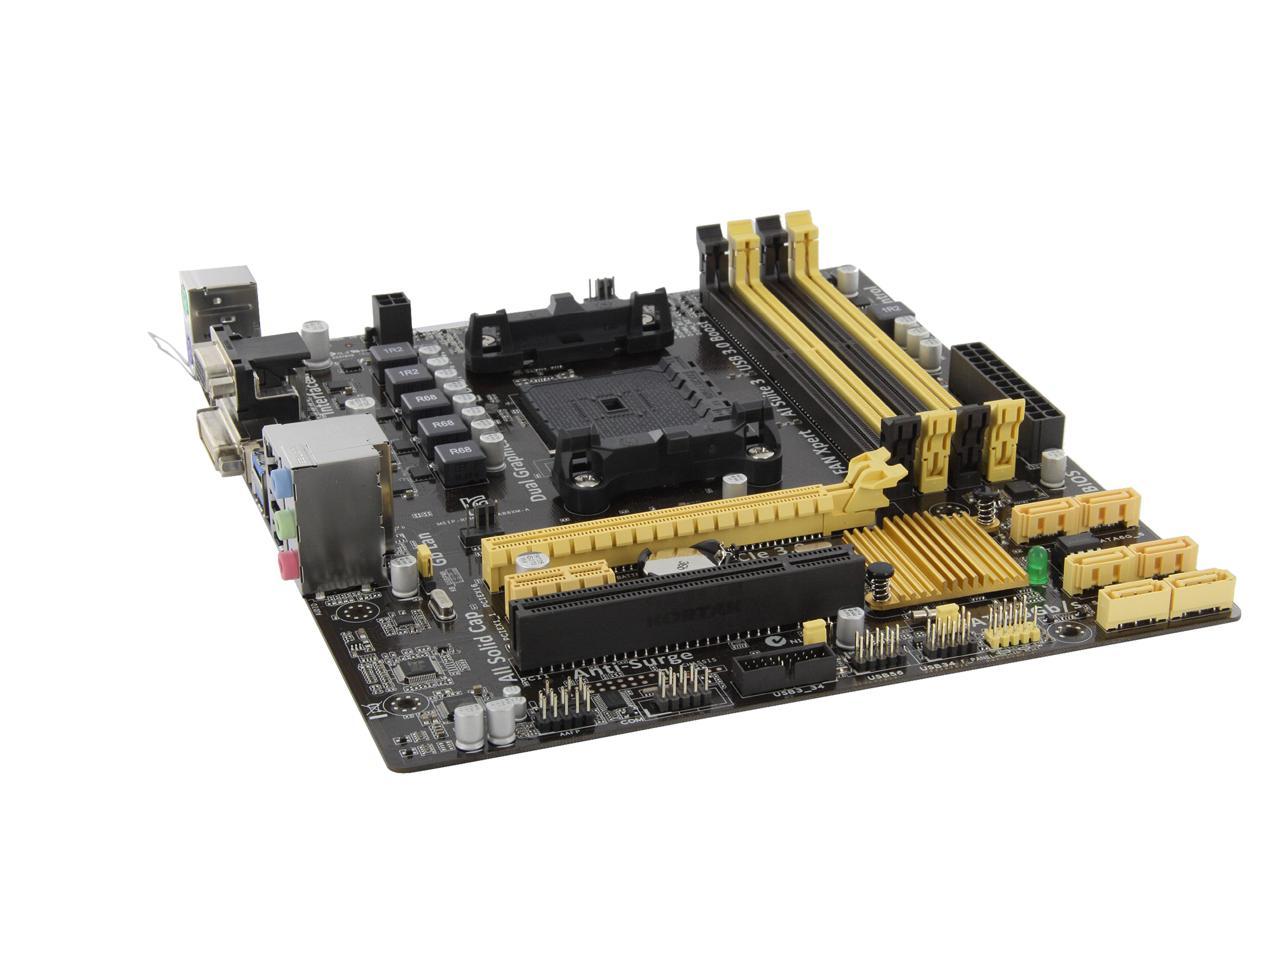 Used - Very Good: ASUS A88XM-A FM2+ Micro ATX AMD Motherboard with 